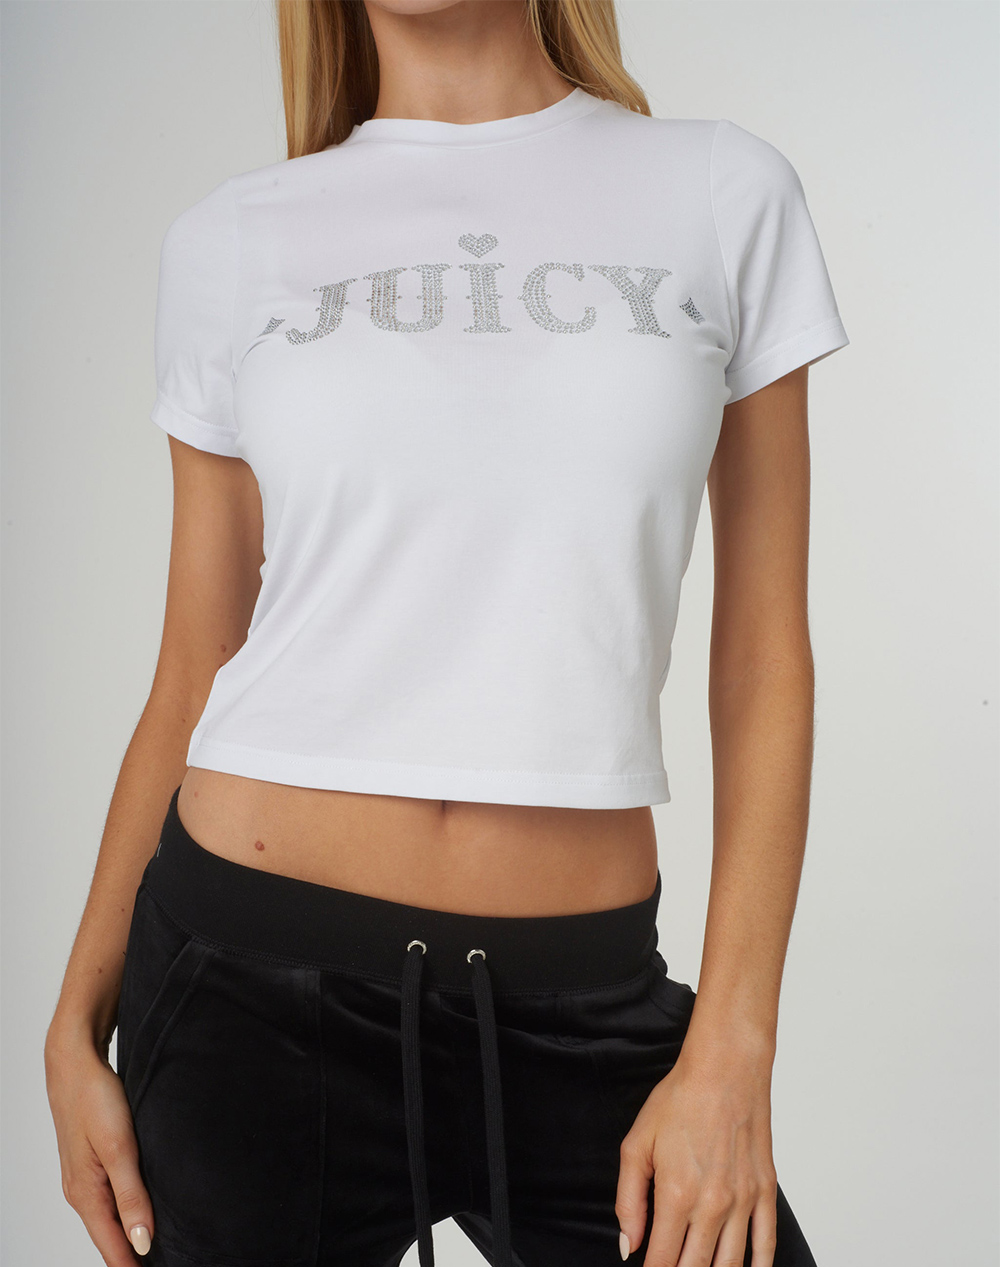 JUICY COUTURE RYDER RODEO FITTED T-SHIRT JCBCT223826-117 White 3810TJUIC3400092_XR01293